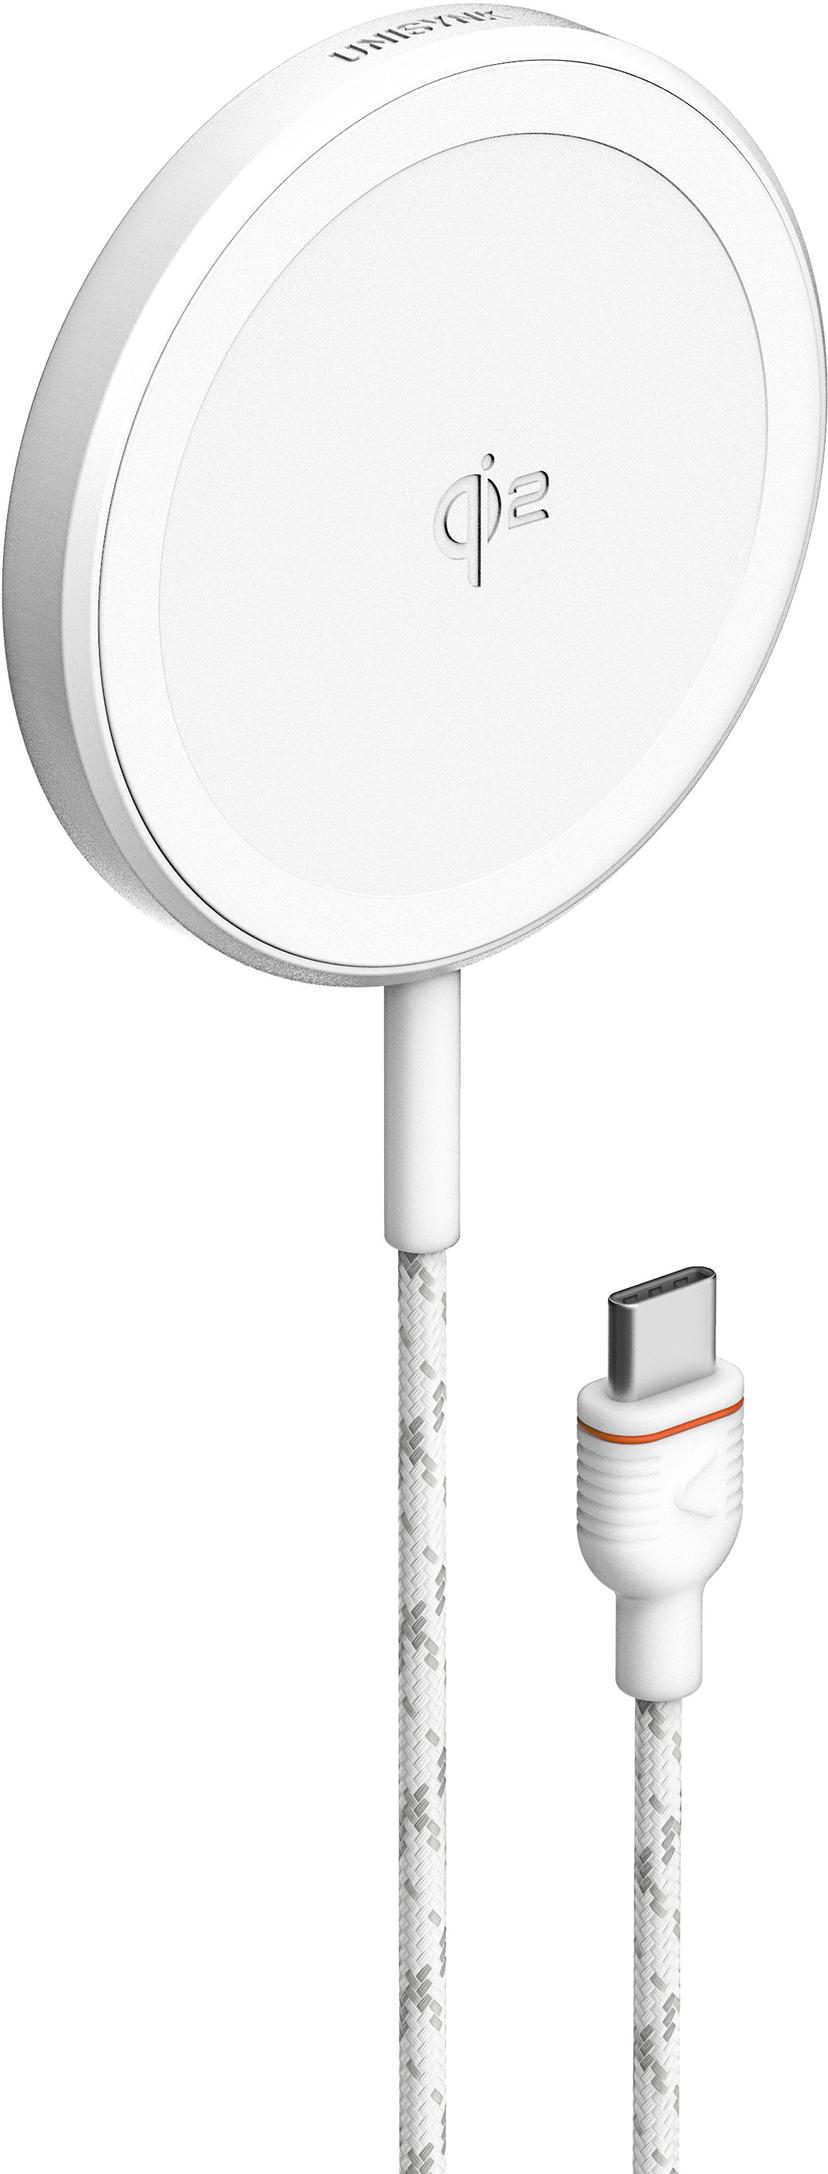 Unisynk Magnetic Wireless Charger Qi2 15W Valkoinen 2m